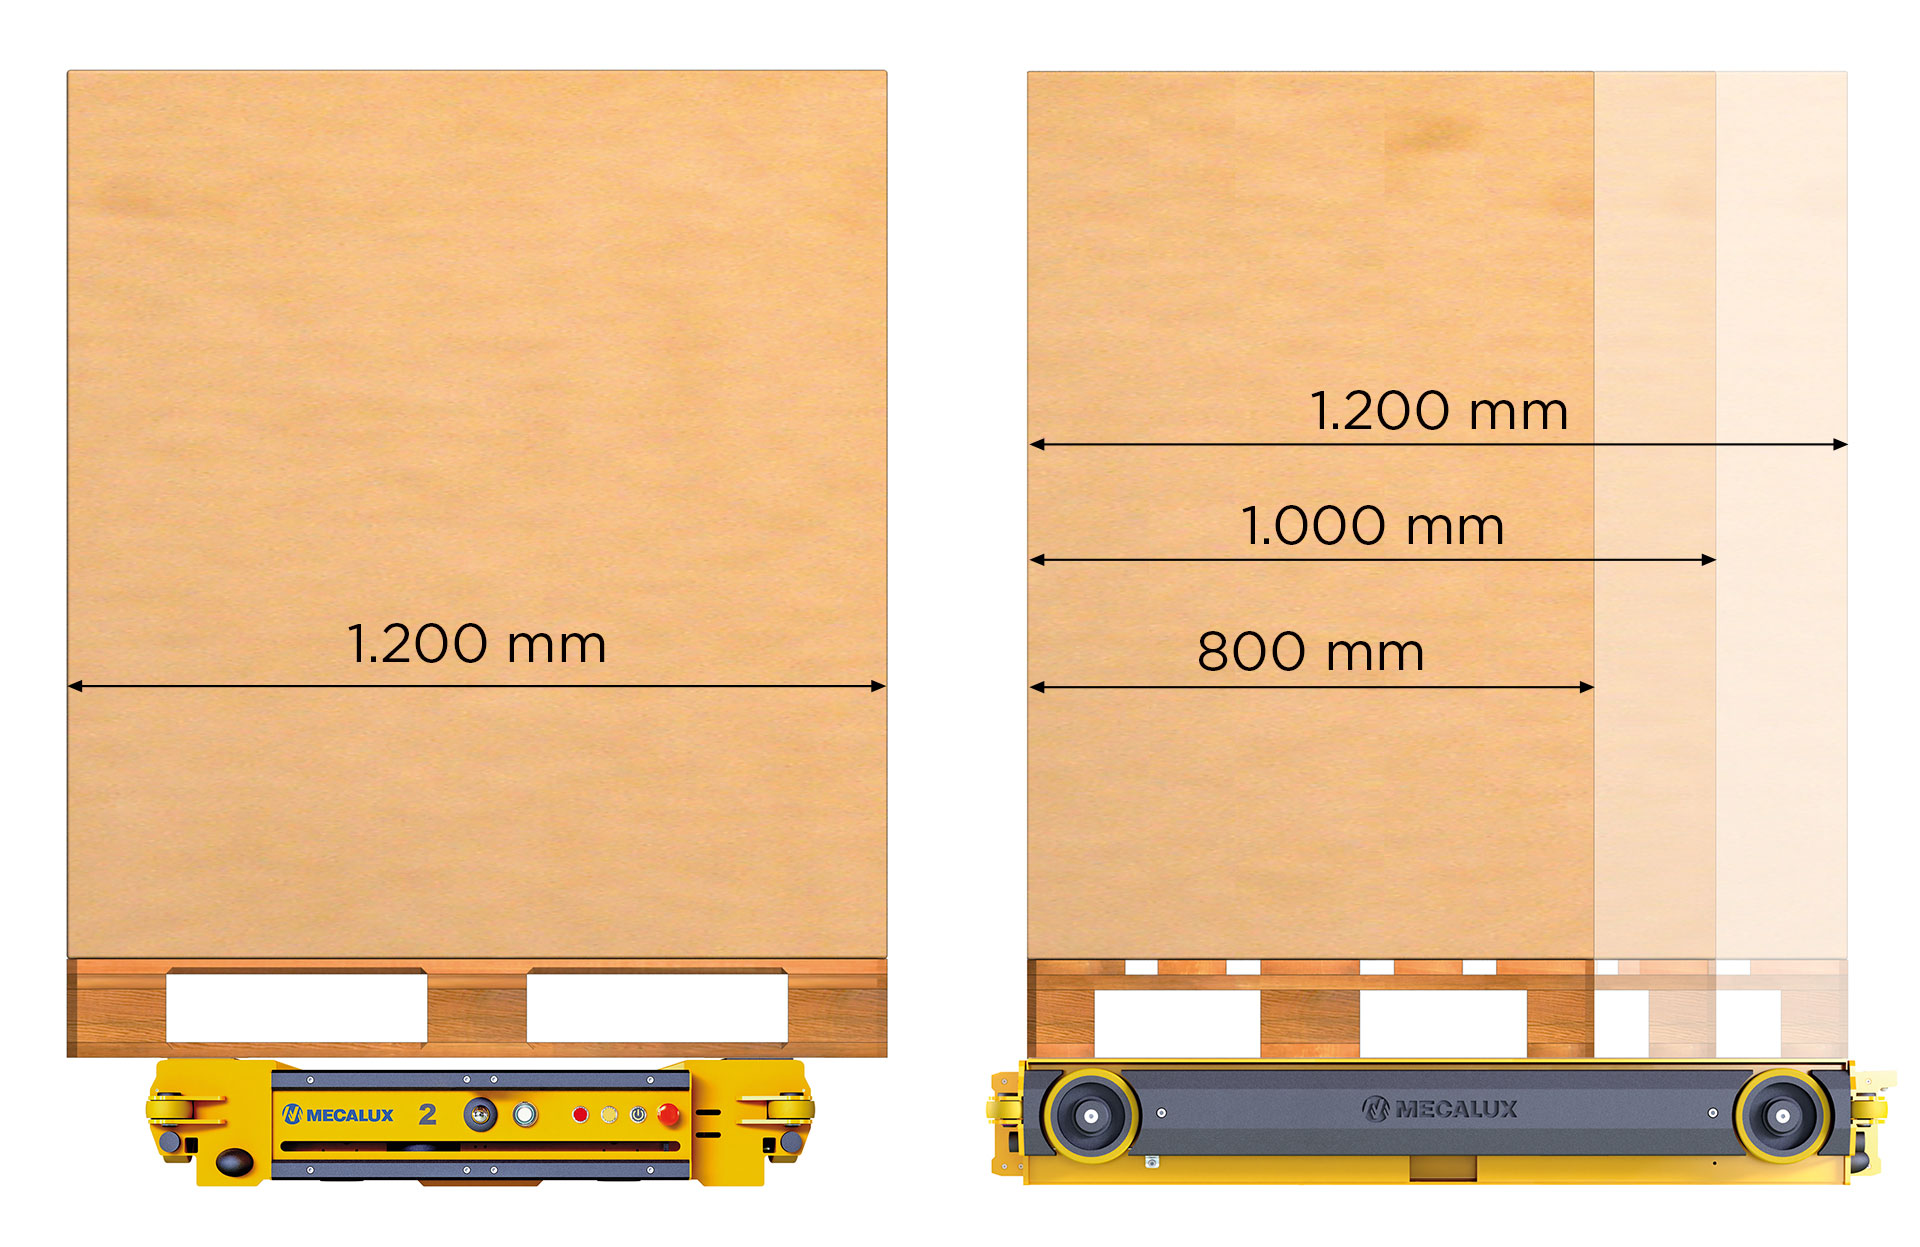 There are three types of Pallet Shuttle cars, adjusting to three different pallet depths: 800, 1,000 and 1,200 mm